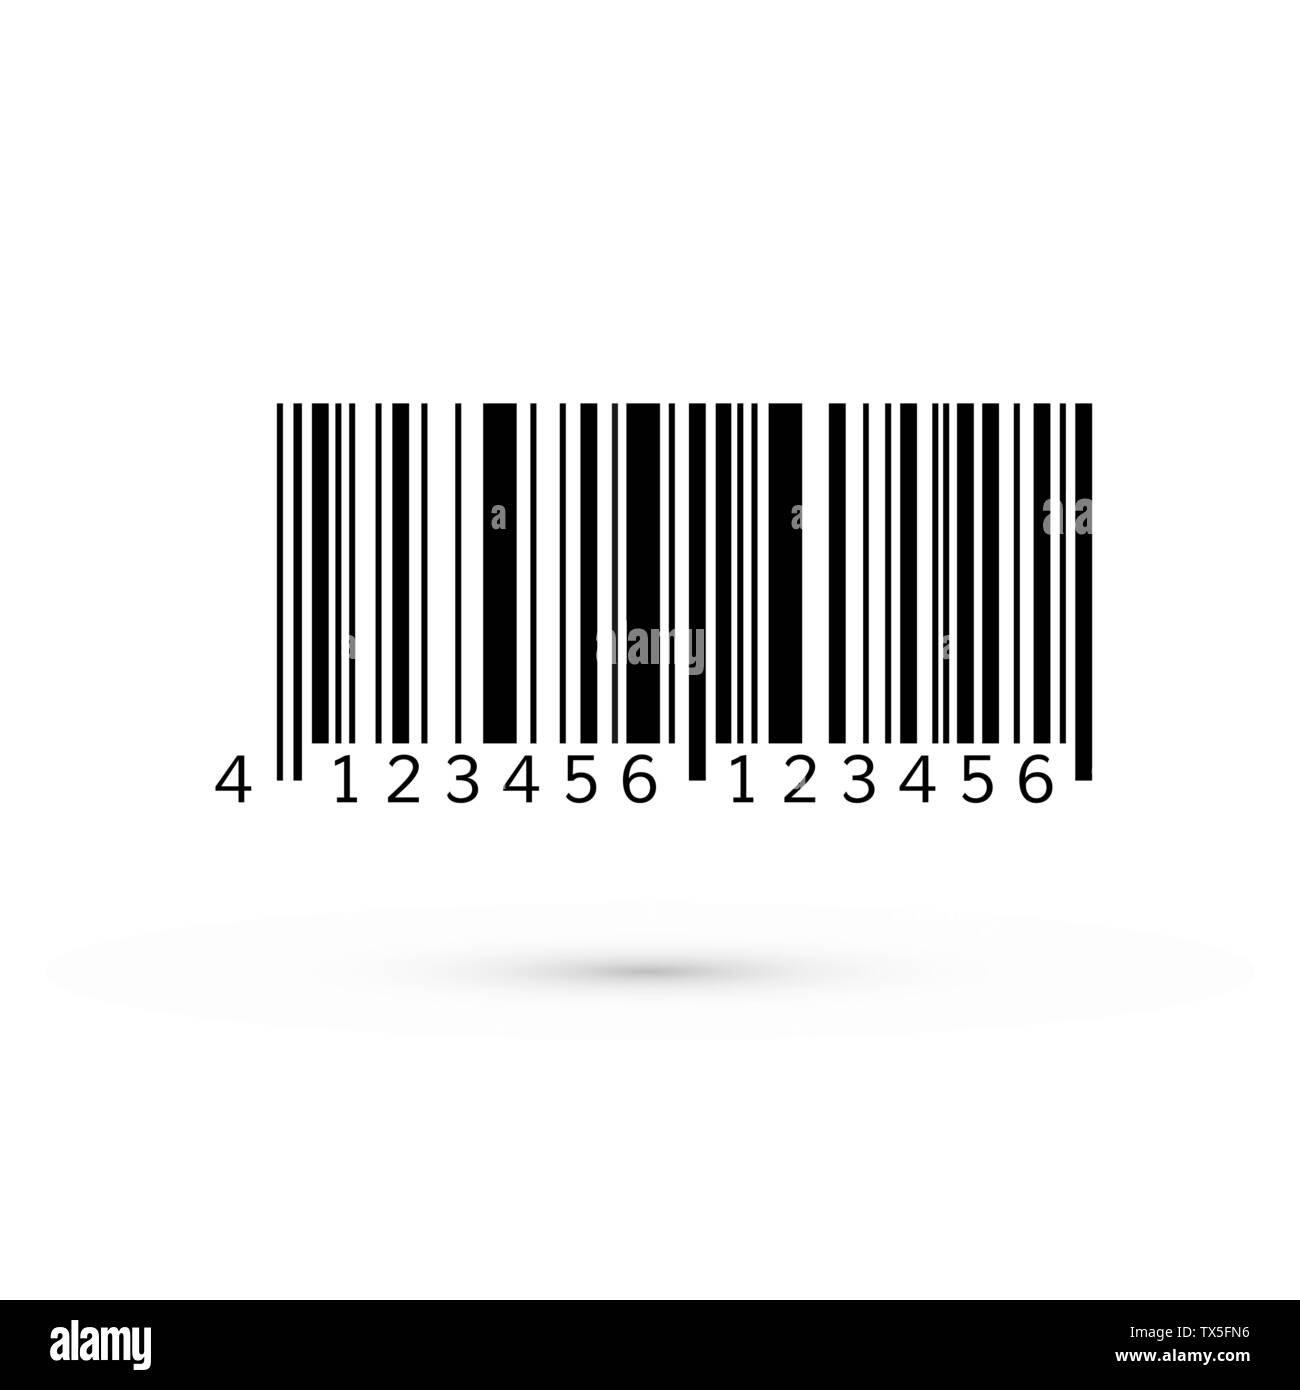 Unique realistic bar code. Striped identification information about product. Vector illustration isolated on white background Stock Vector